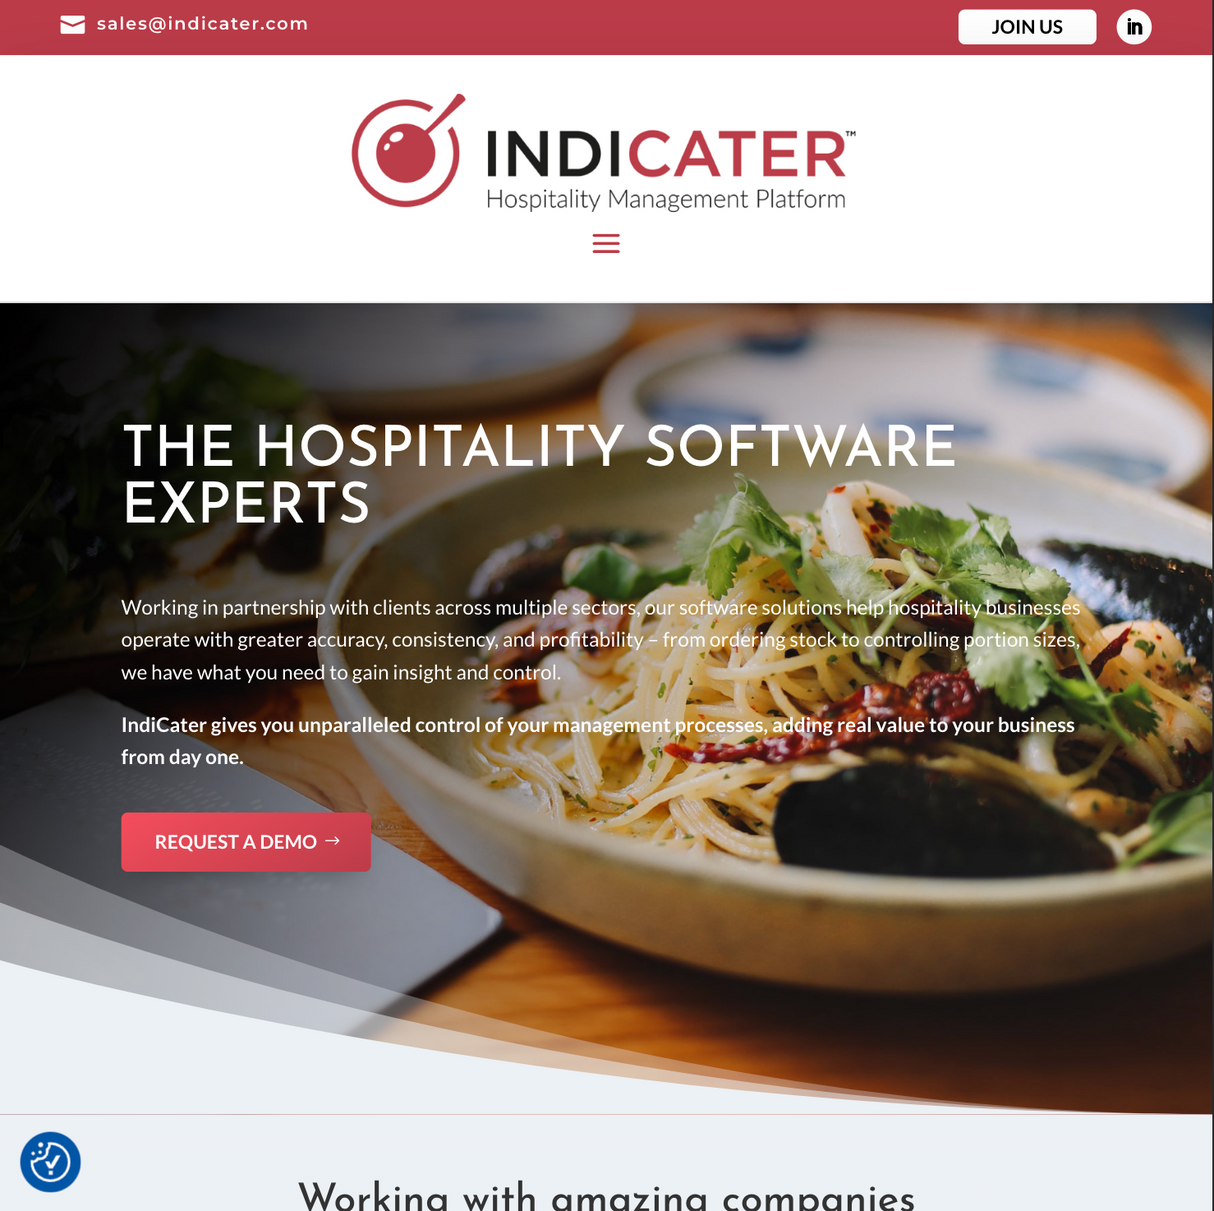 IndiCater